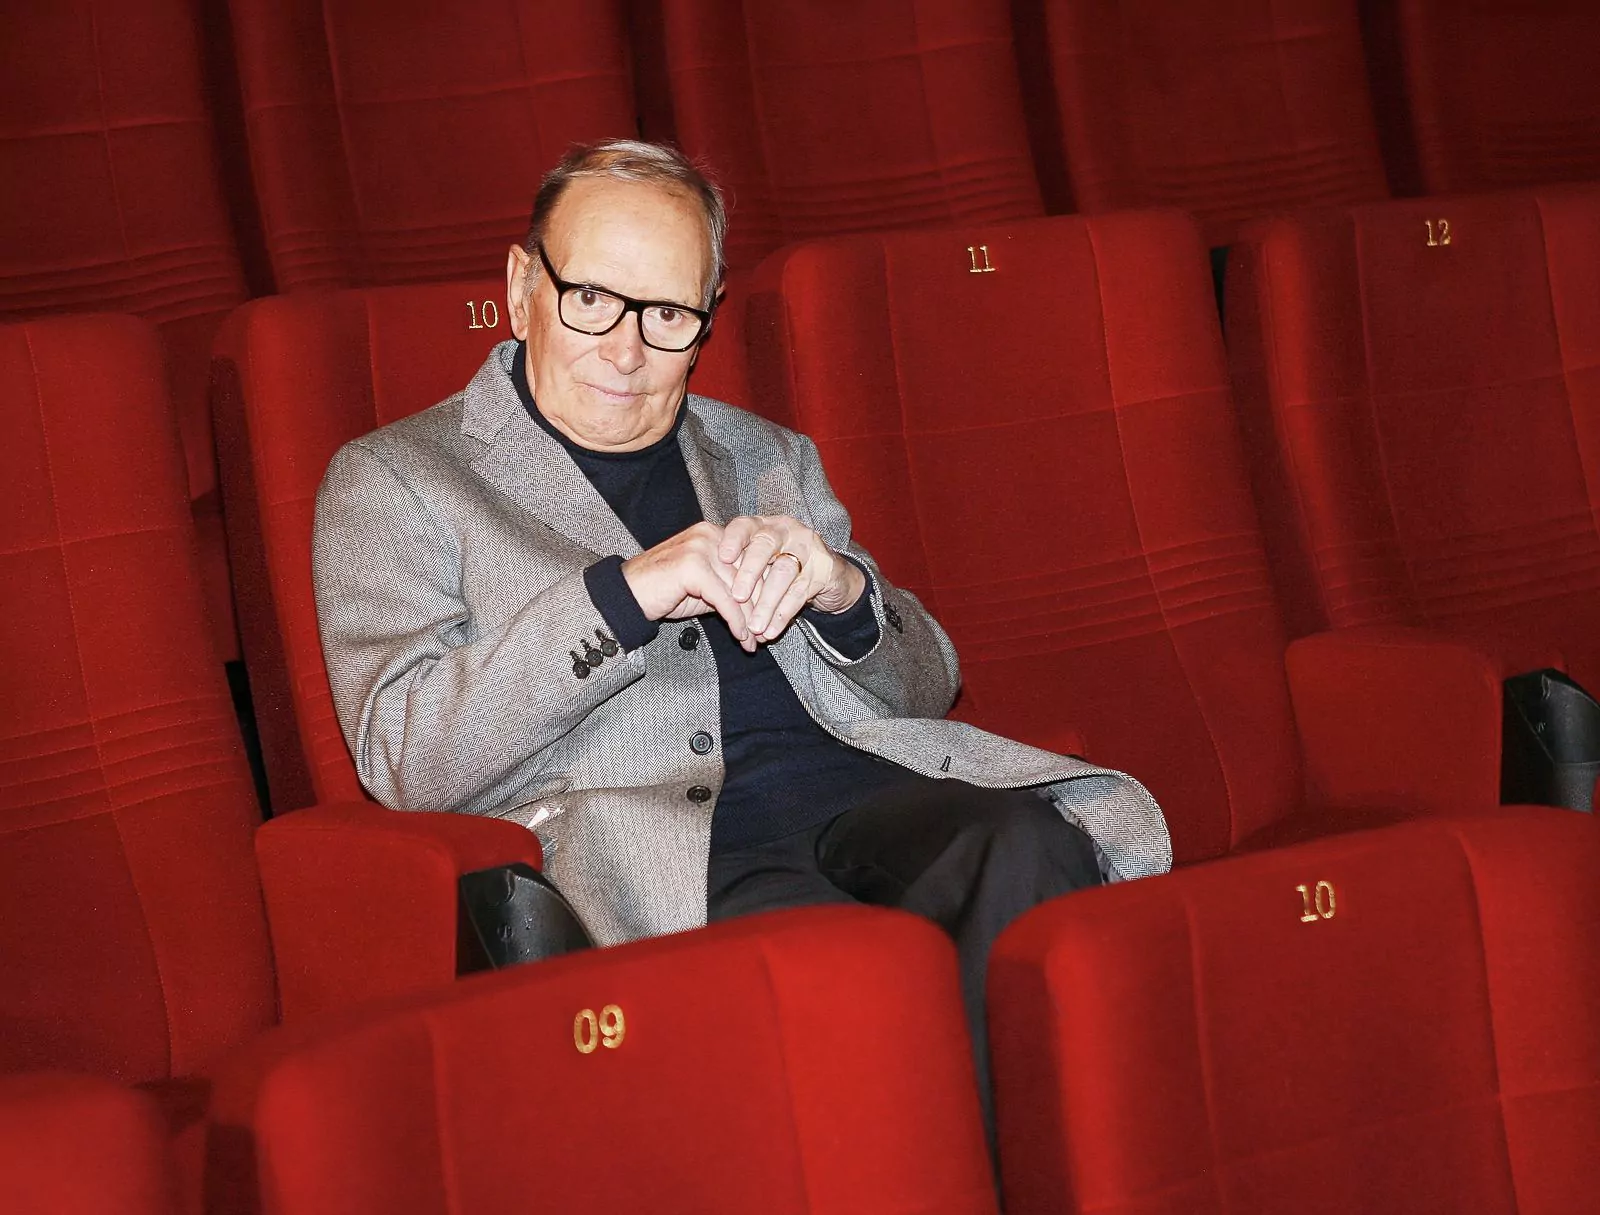 Ennio Morricone photocall in support of his 50 Jahre Music tour, Berlin, December 6, 2013.